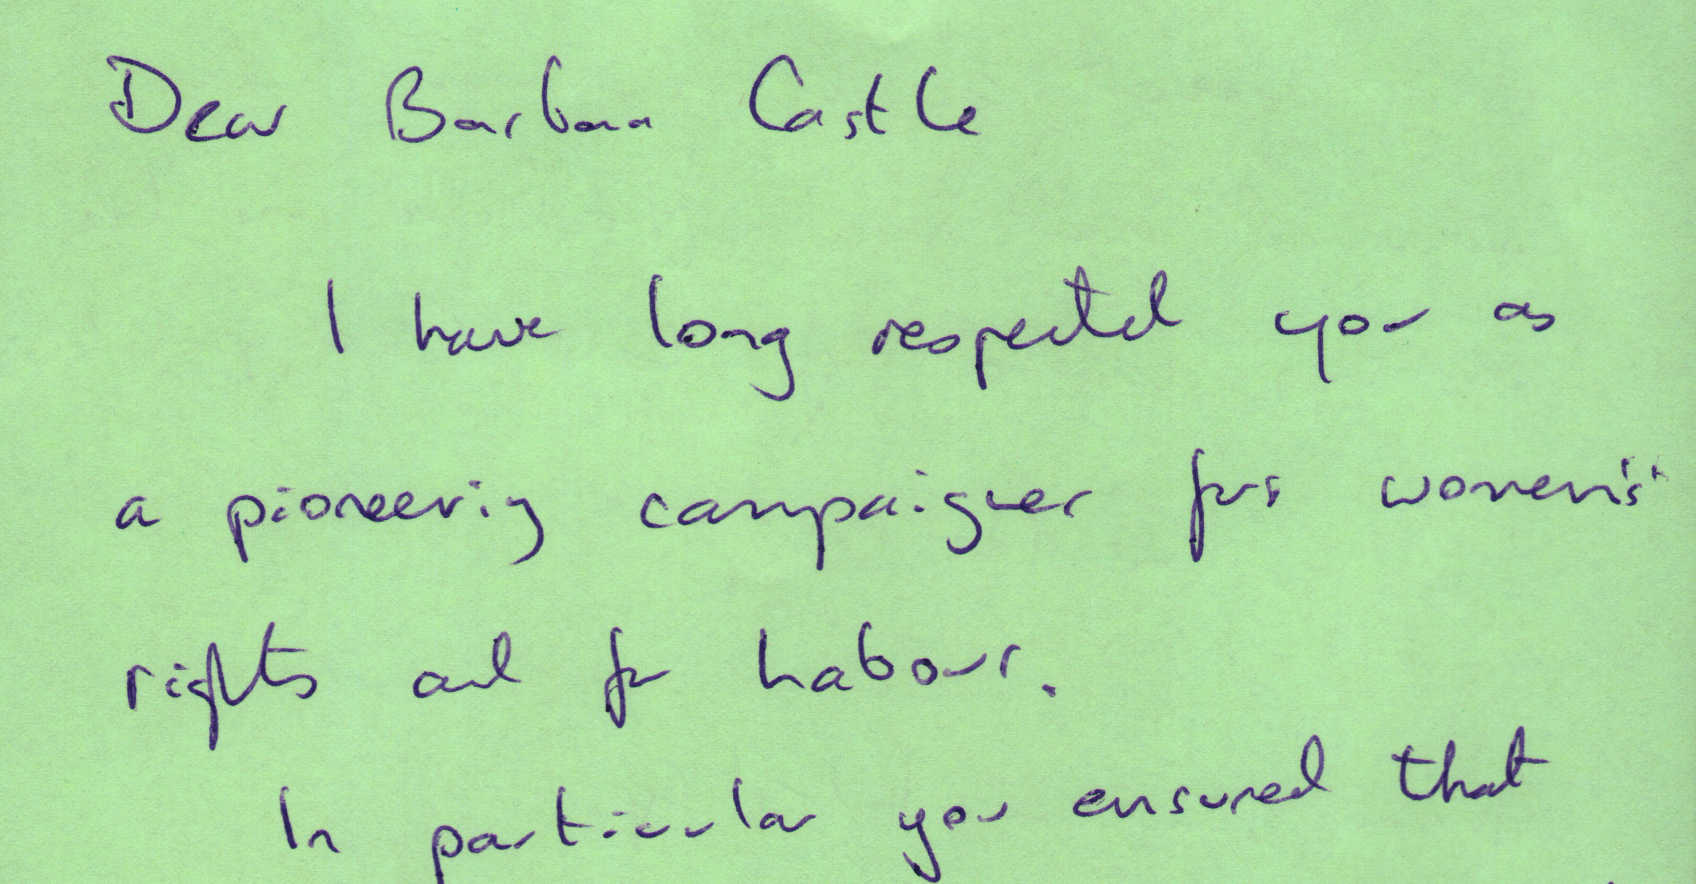 Letter to Barbara Castle from Keith Westley